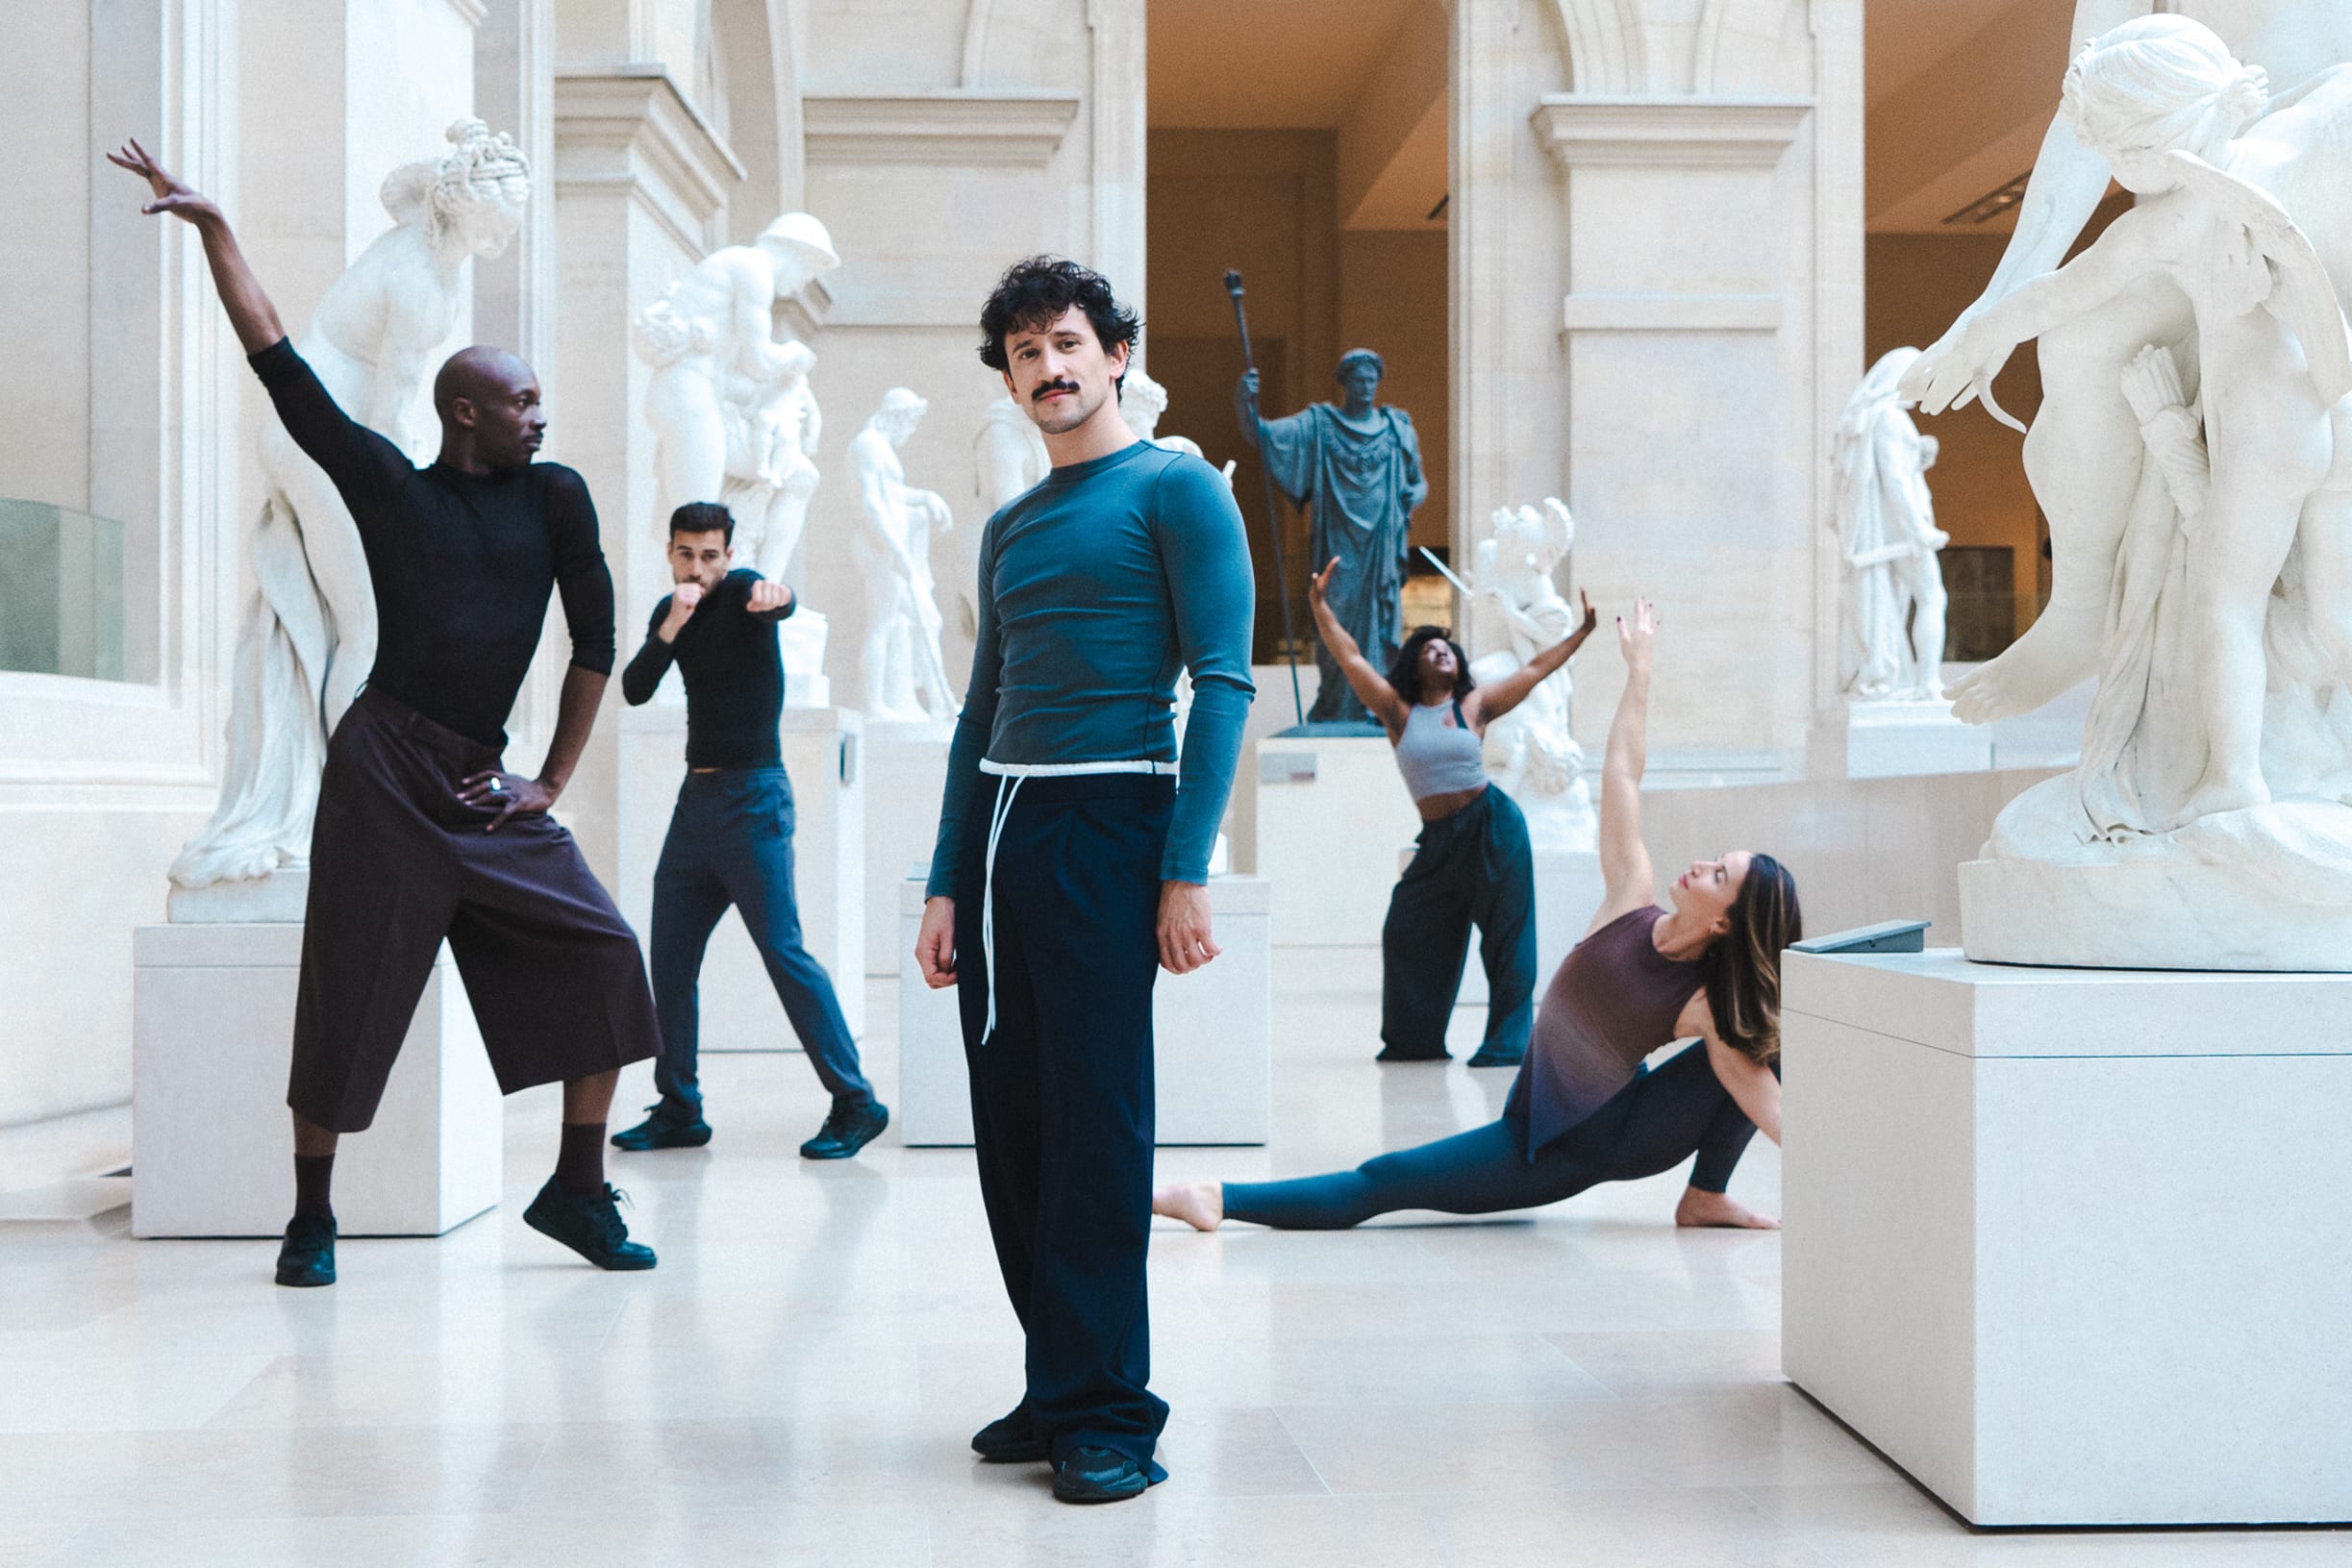 From left to right: Salim Bagayoko, Léo Bordessoule, Mehdi Kerkouche, Queensy Blazin’, and Laure Dary at the Musée du Louvre © 2023 Musée du Louvre, Hanna Pallot